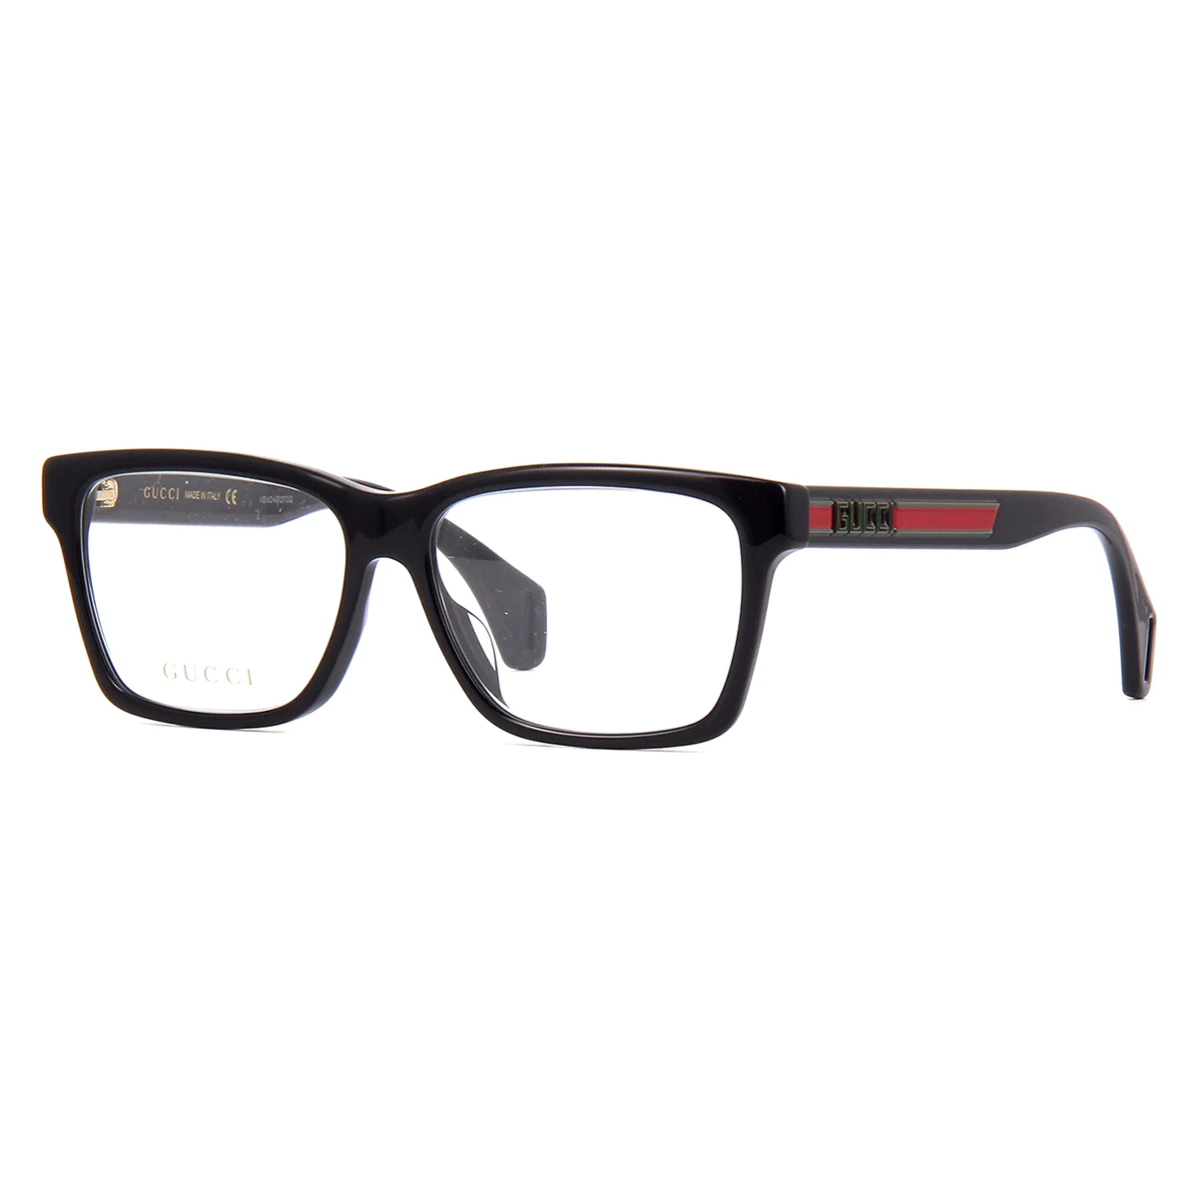 "Gucci Eyewear Collection - Shop now for the trendiest Gucci frames, including the 0466OA spectacle frame for men."